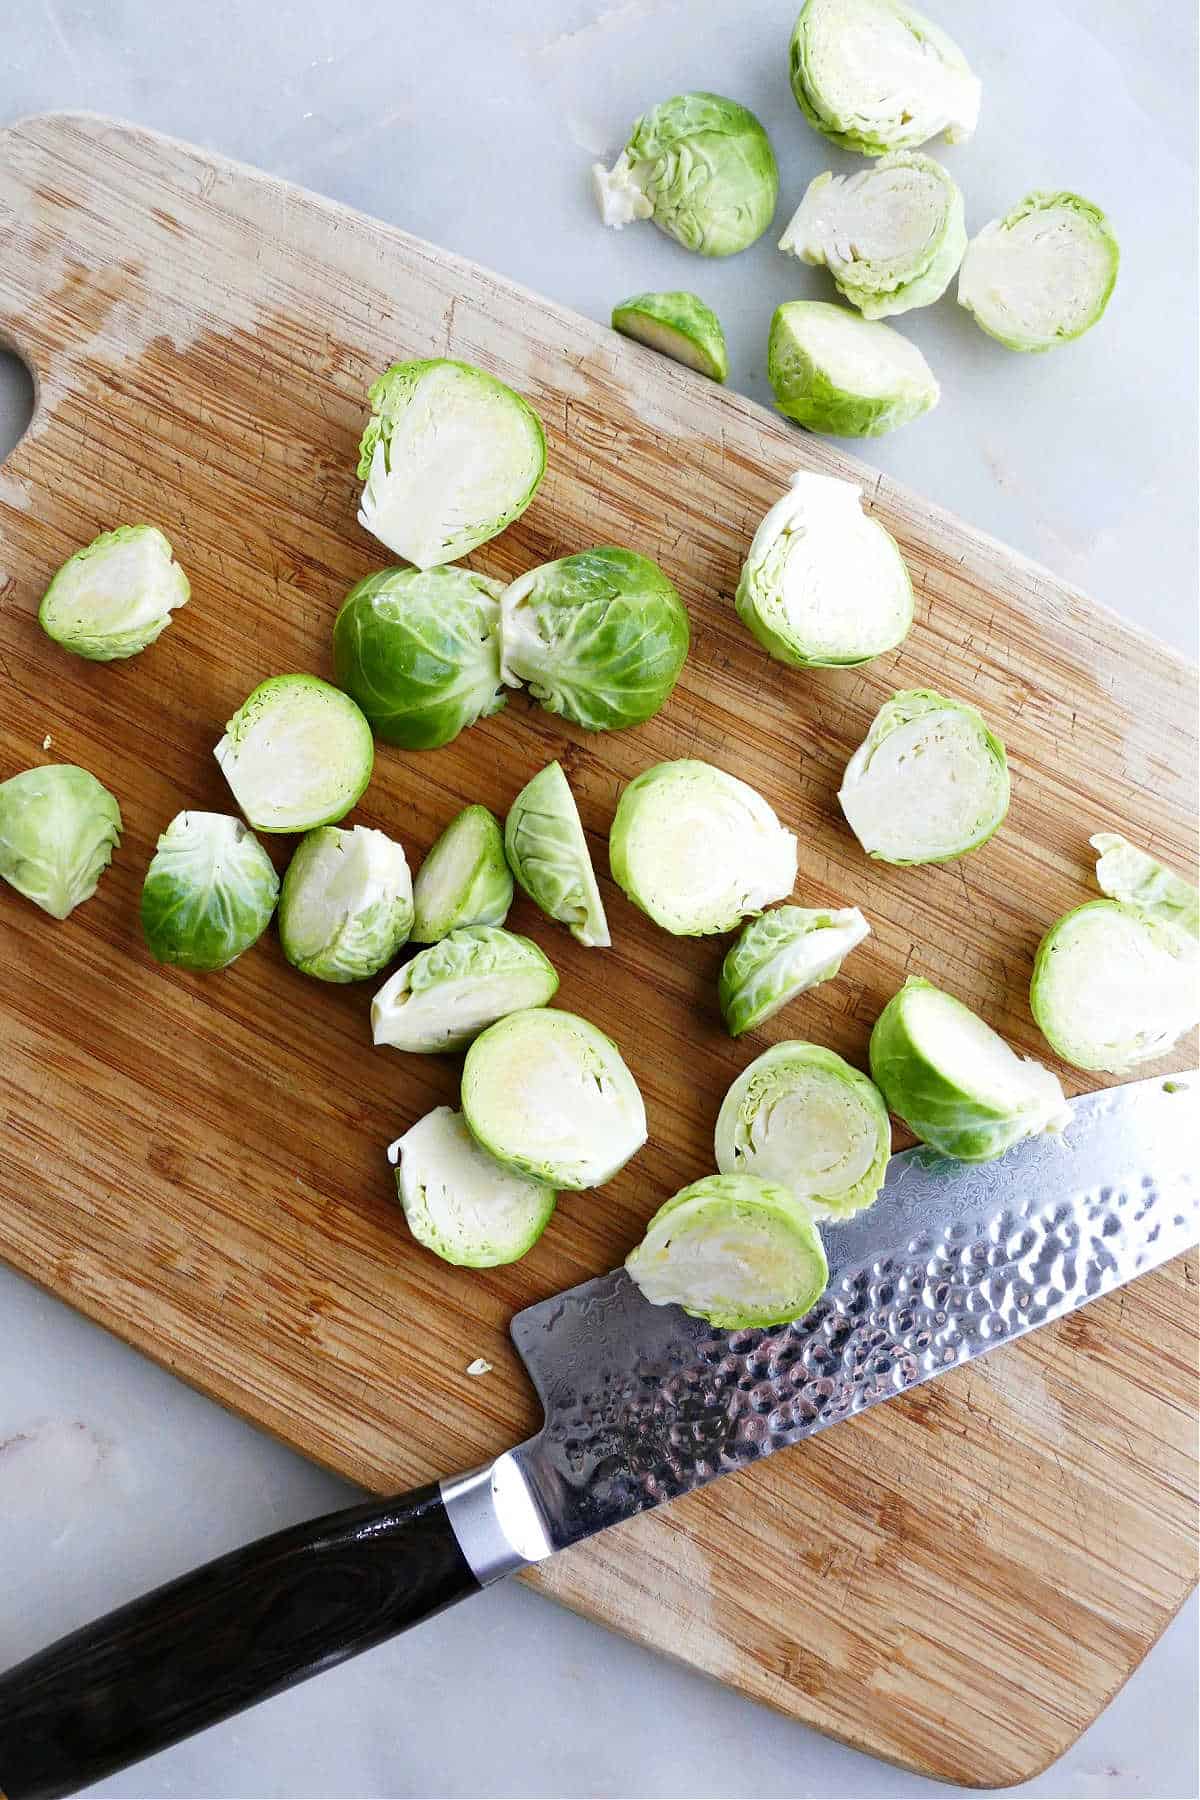 sliced Brussels sprouts on a bamboo cutting board next to a chef's knife